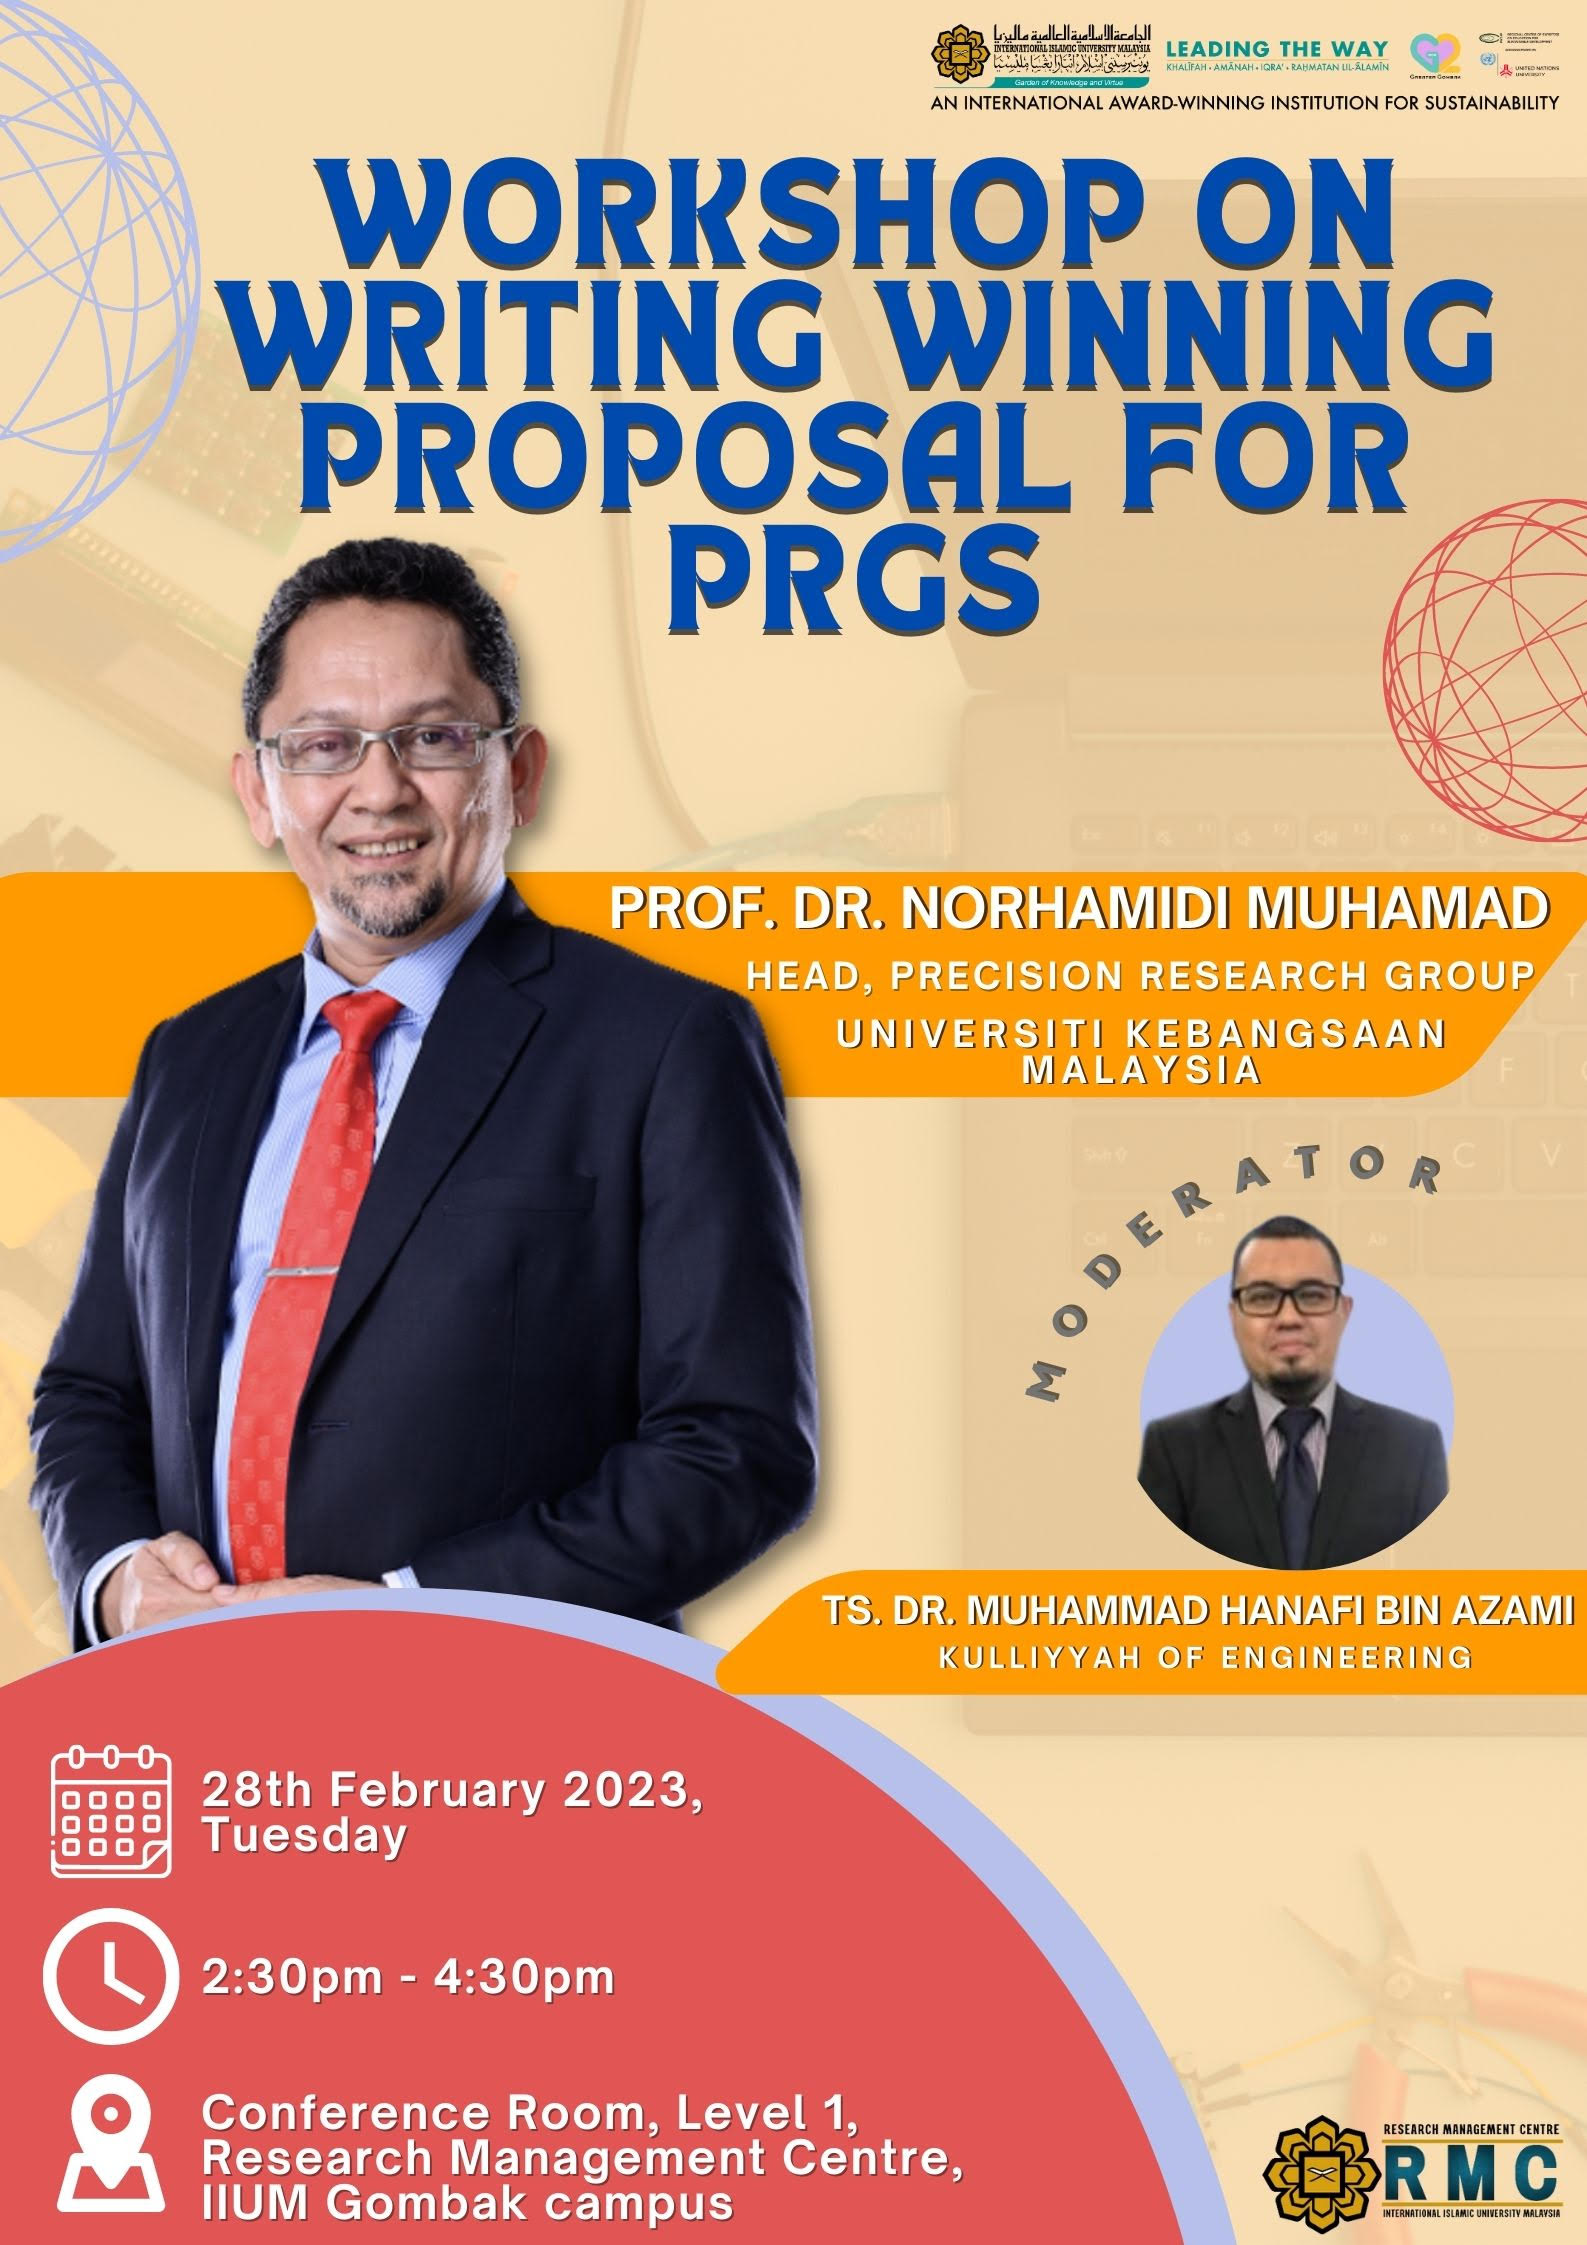 WORKSHOP ON WRITING WINNING PROPOSAL FOR PRGS